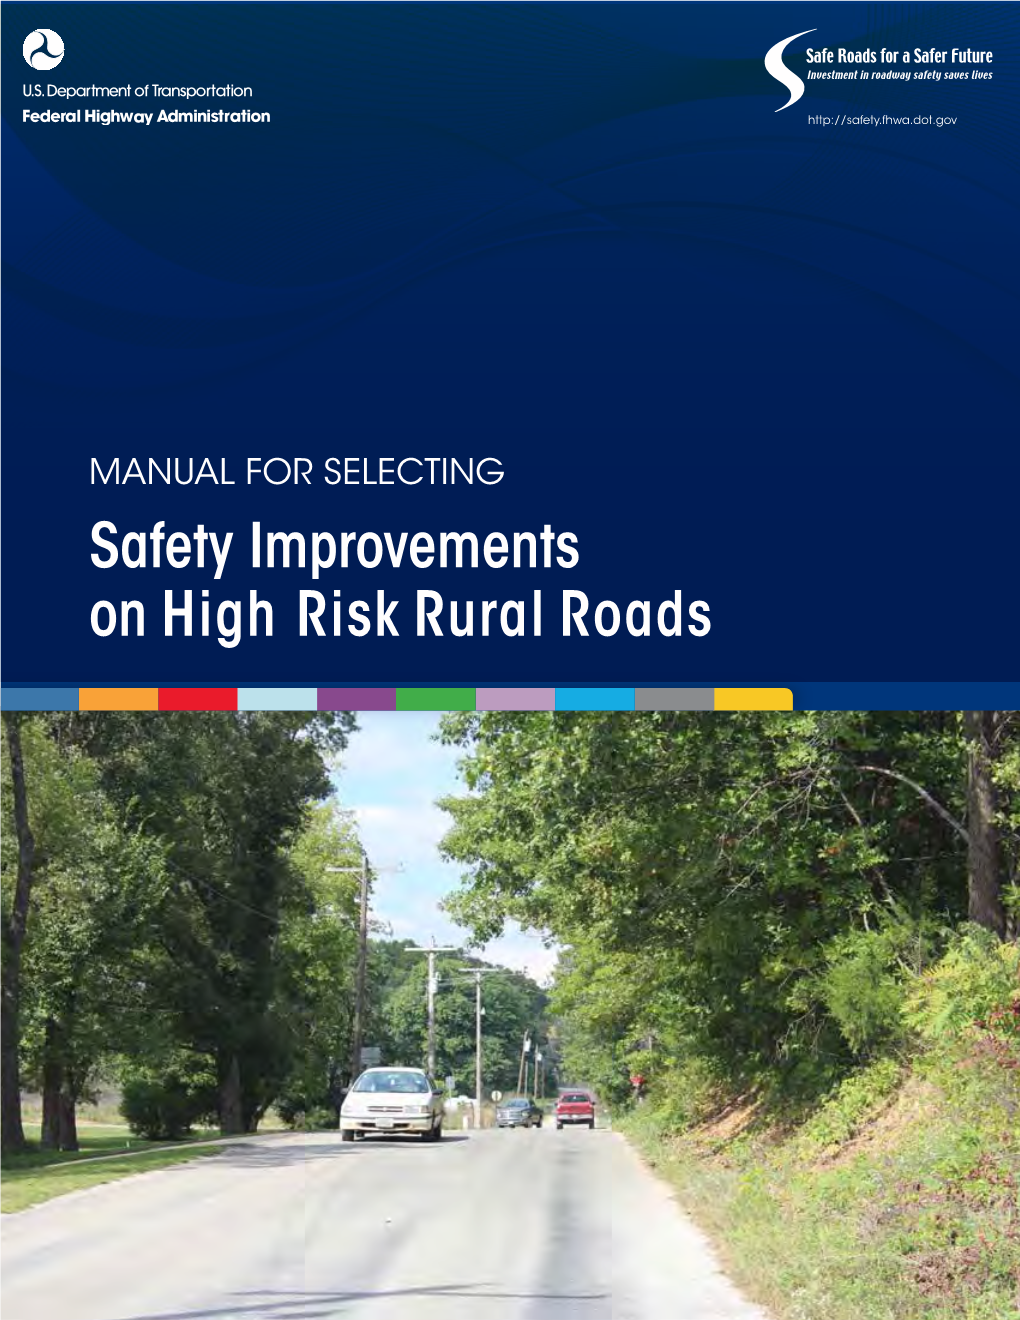 Safety Improvements on High Risk Rural Roads